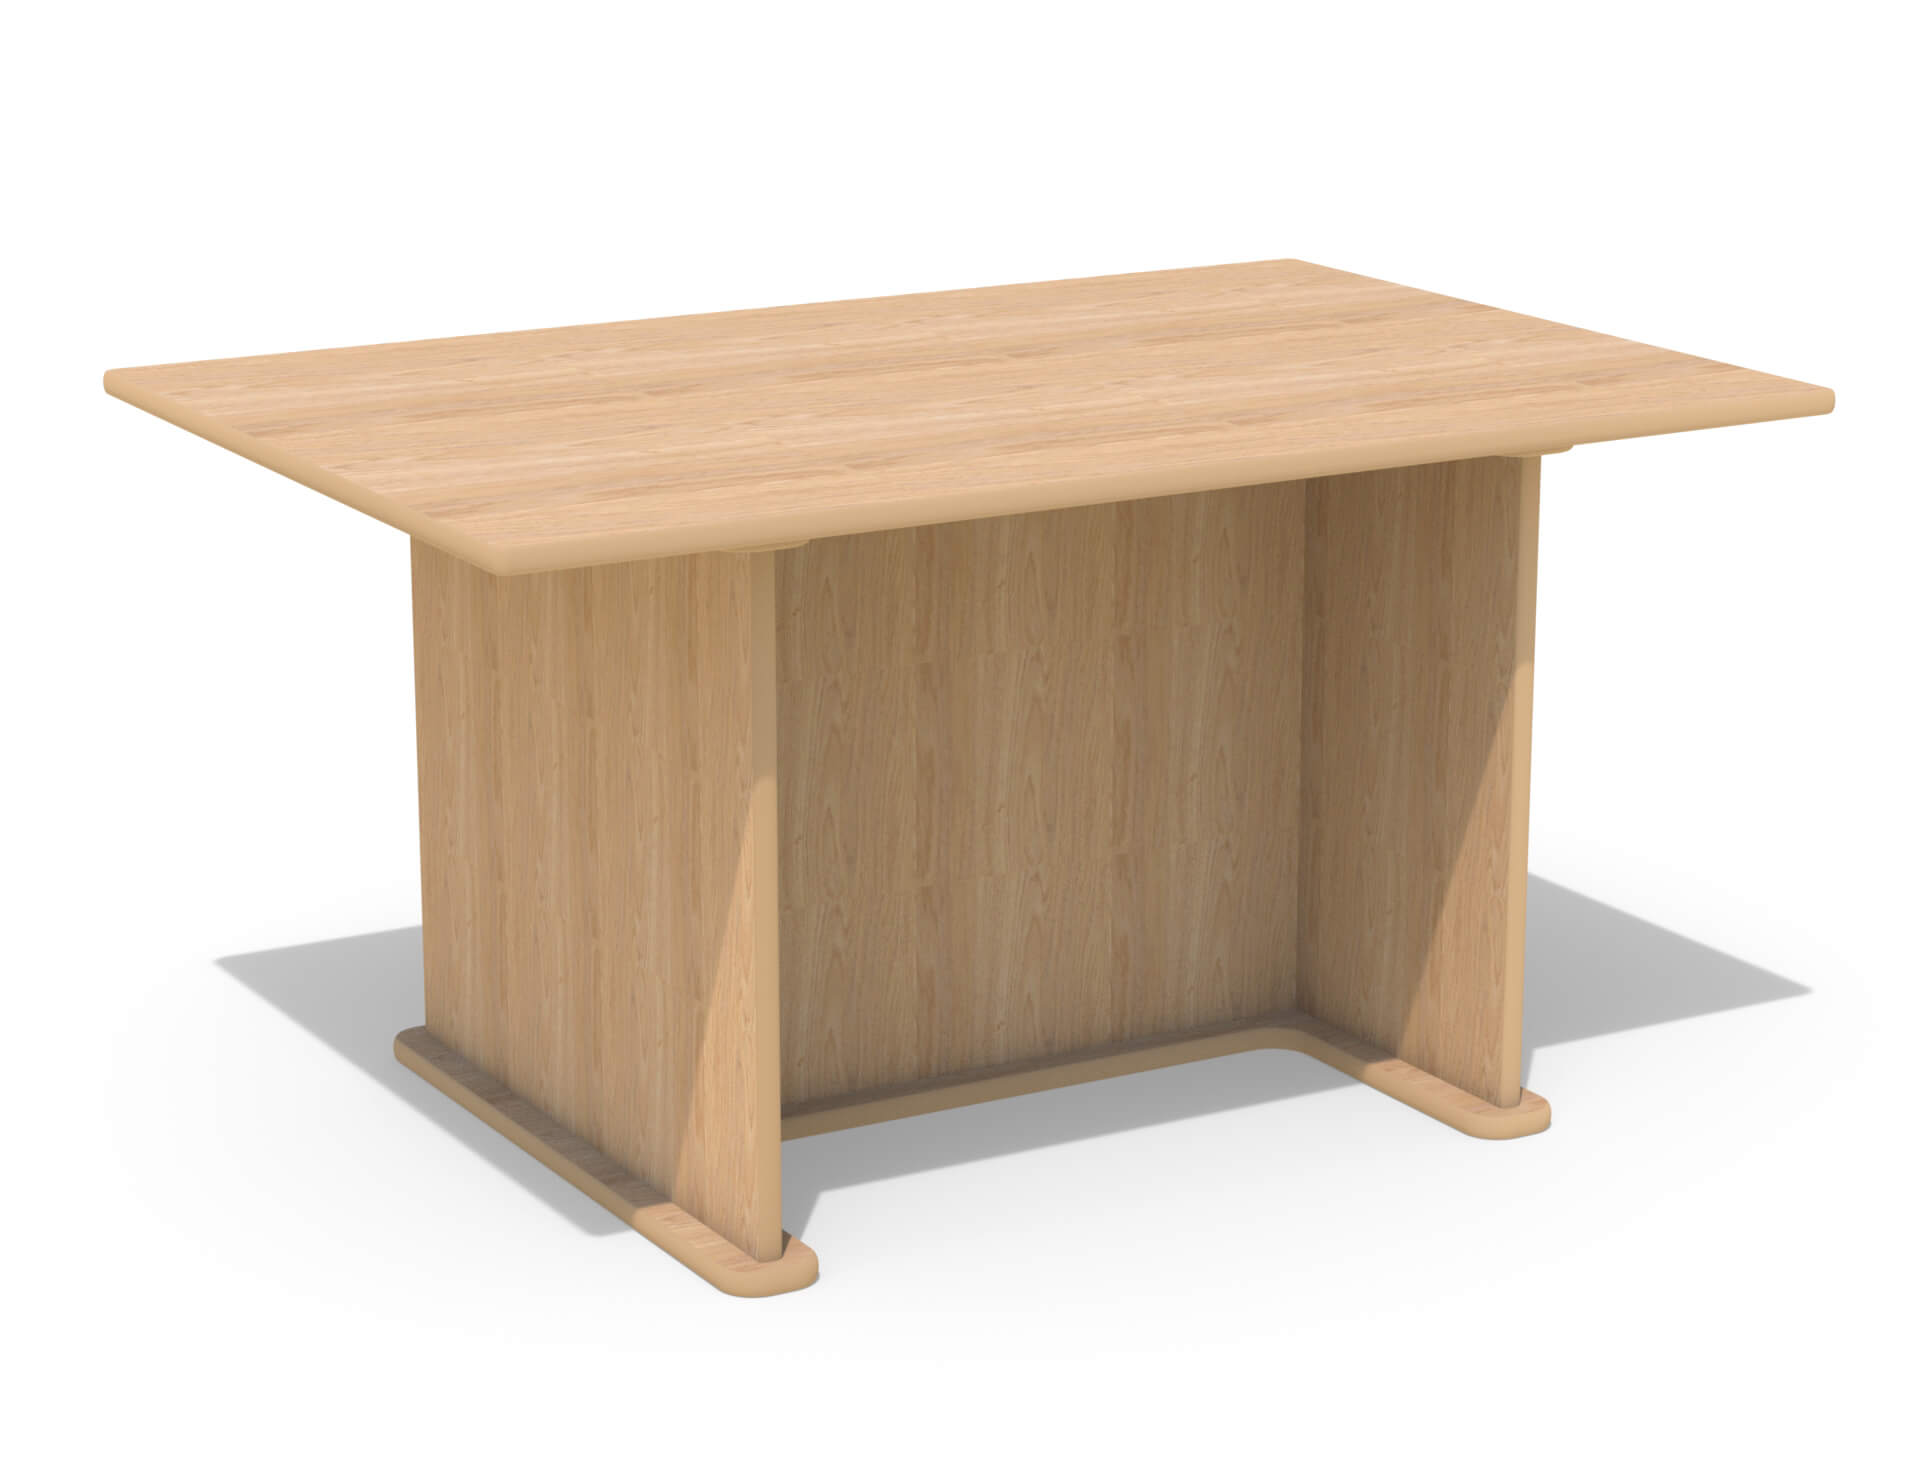 Indistruct Rectangular Dining Table